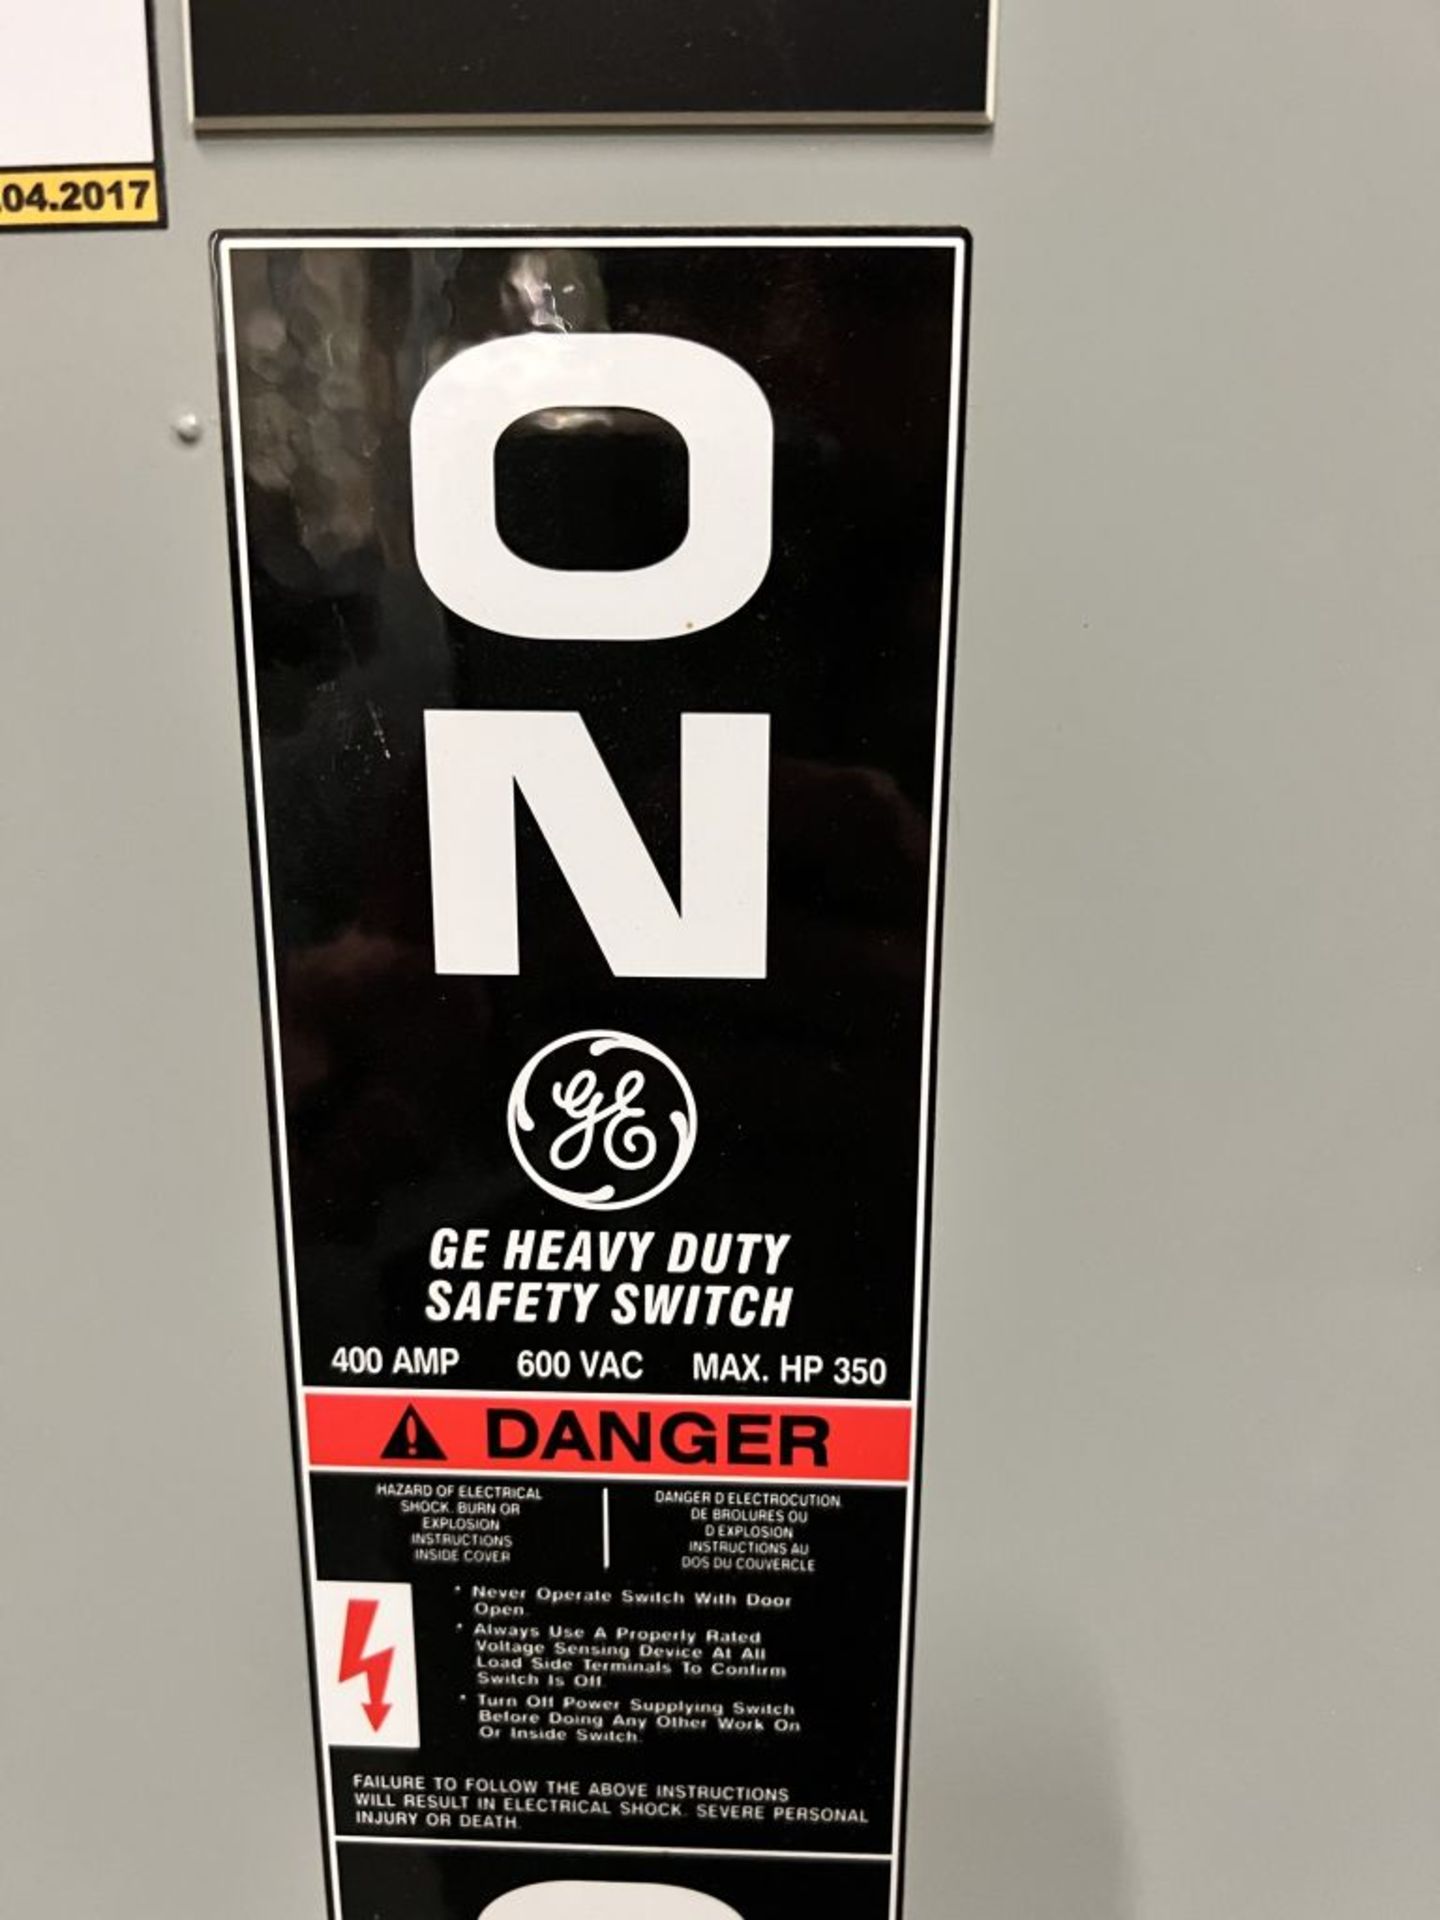 Spartanburg, SC - GE Heavy Duty Safety Switch - Image 4 of 5